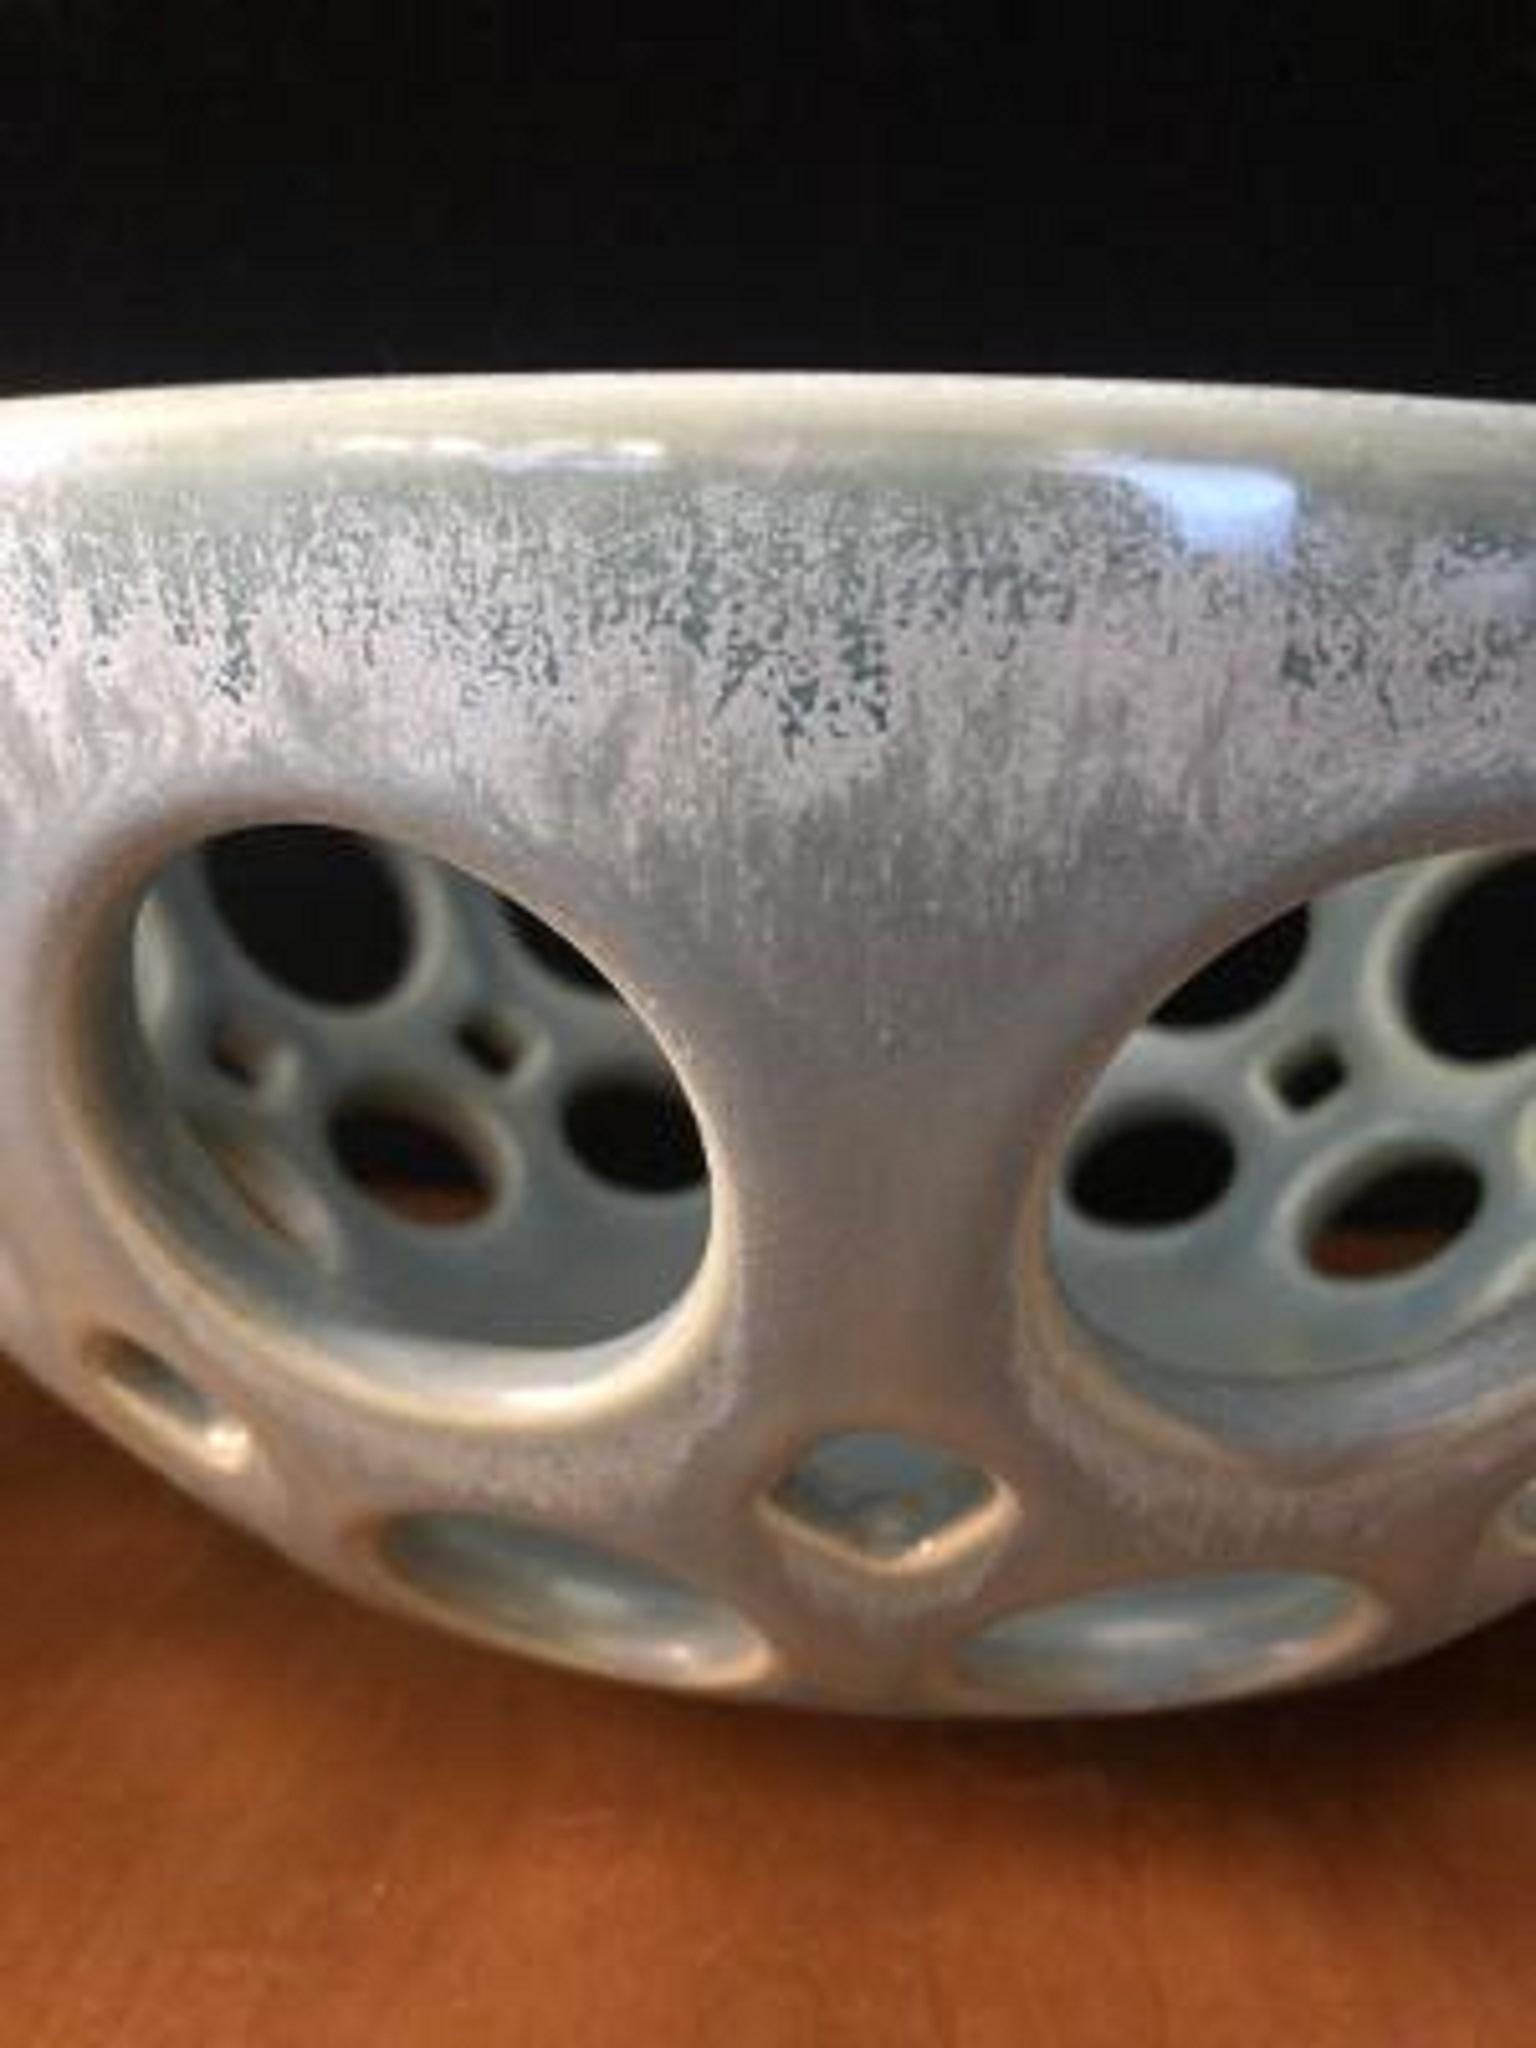 Inspired by Mid-Century Modern design, this bowl is wheel thrown and hand pierced stoneware. The satin glaze varies subtly from moss green to blue to gray. Controlled, slow cooling in the kiln allows tiny crystaline structures to form creating a